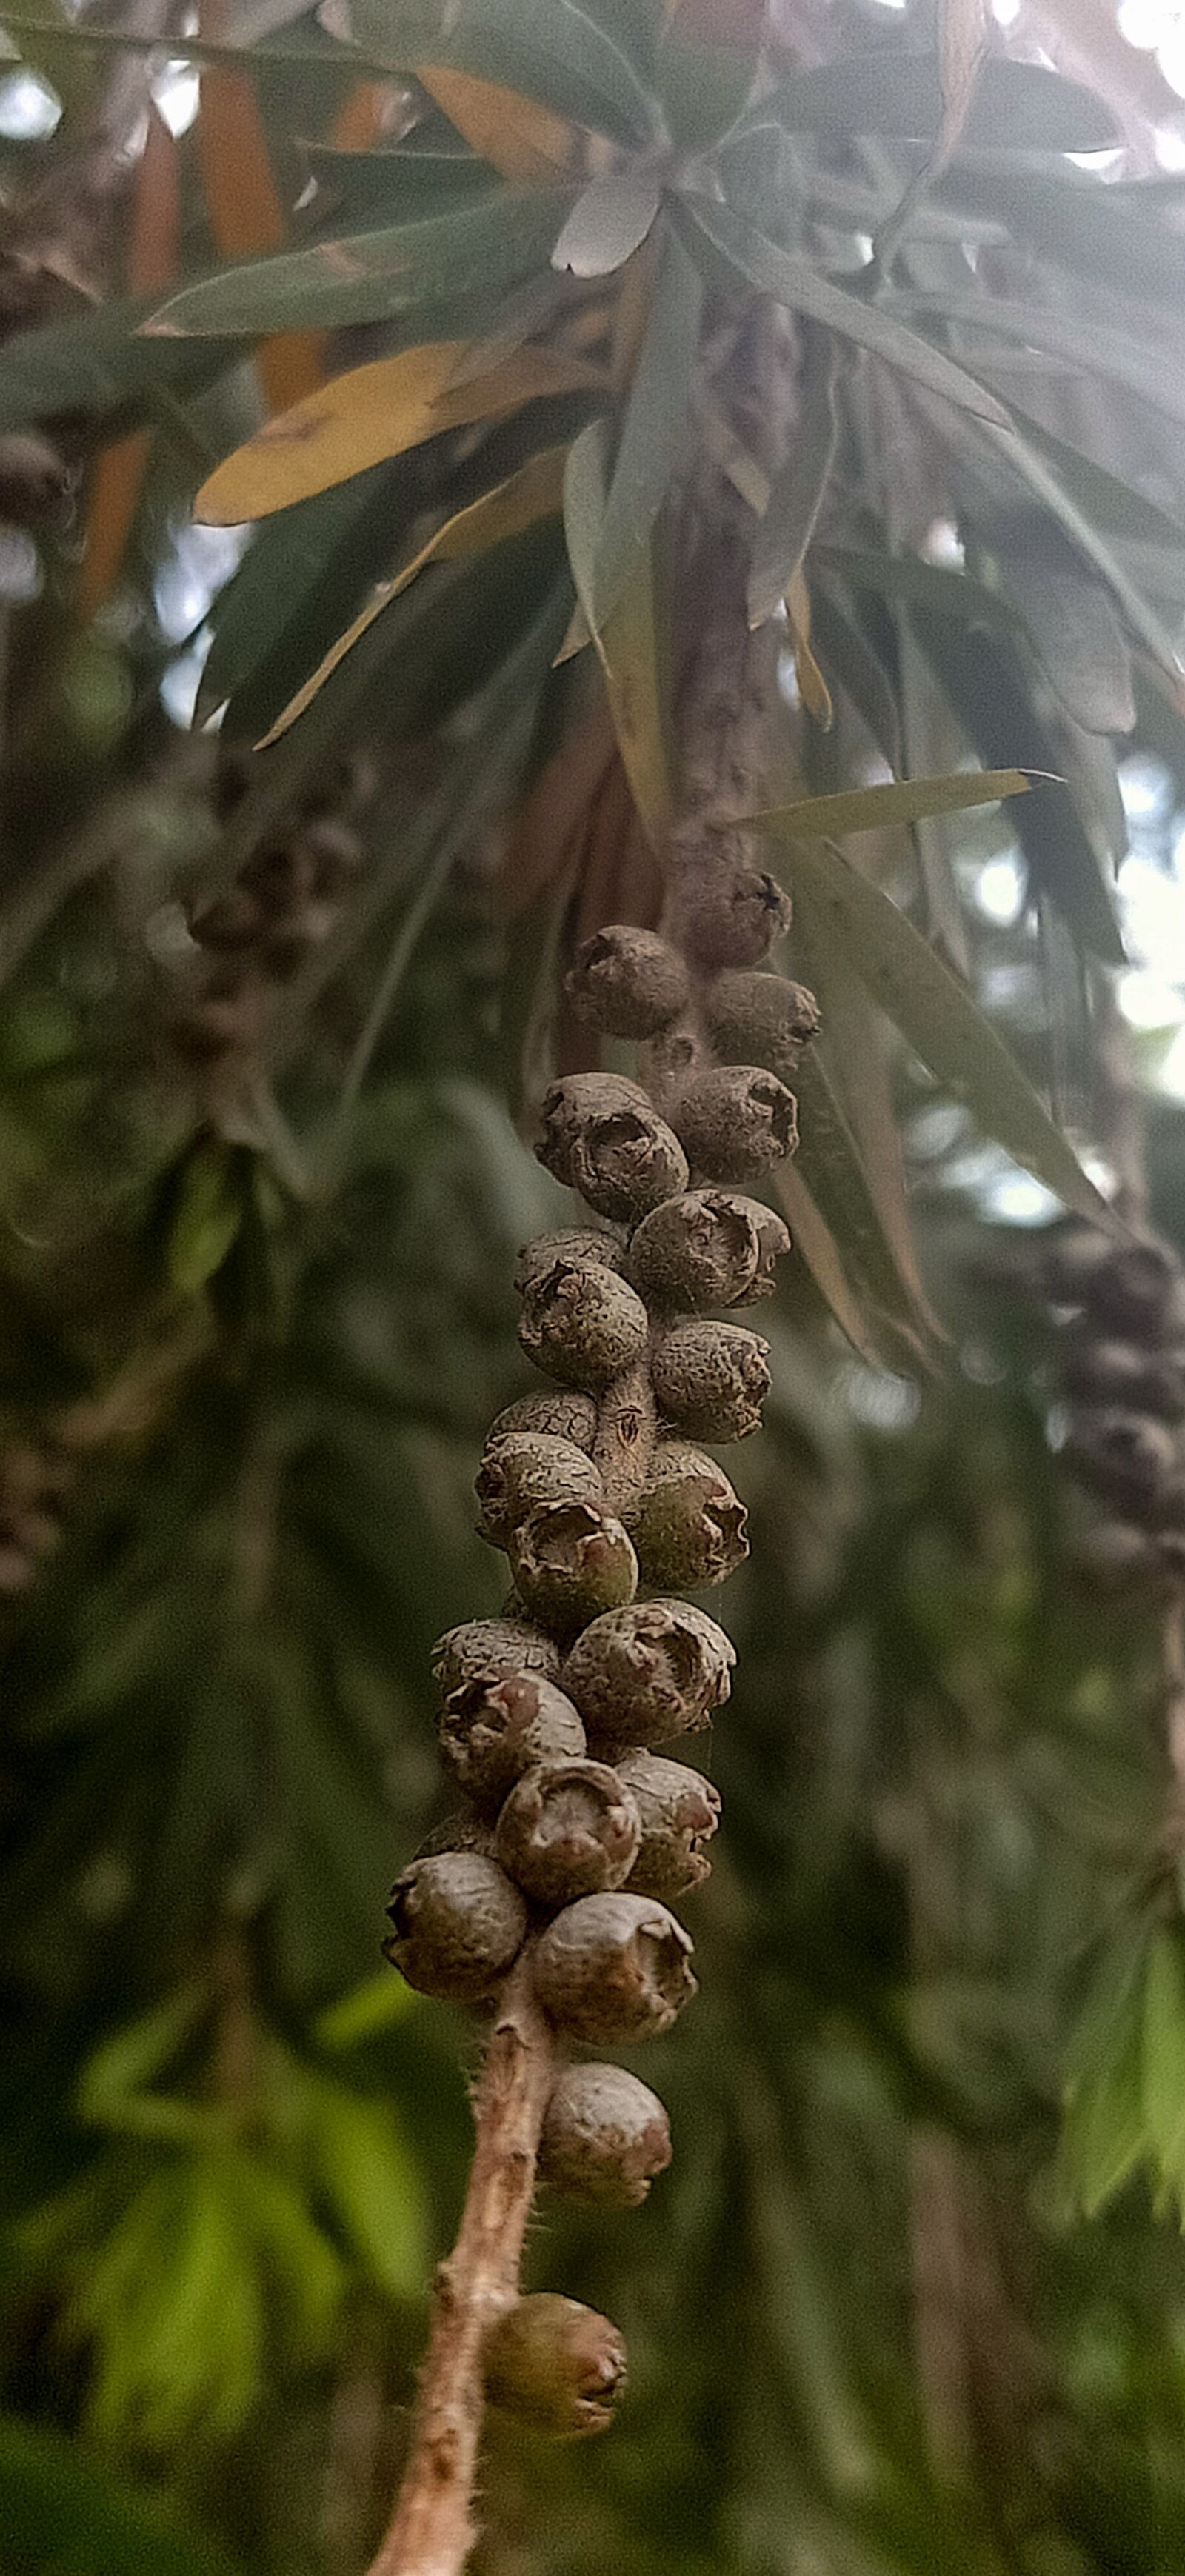 OPPO F11 PRO sample photo. Nature, fruits, best 2020 photography